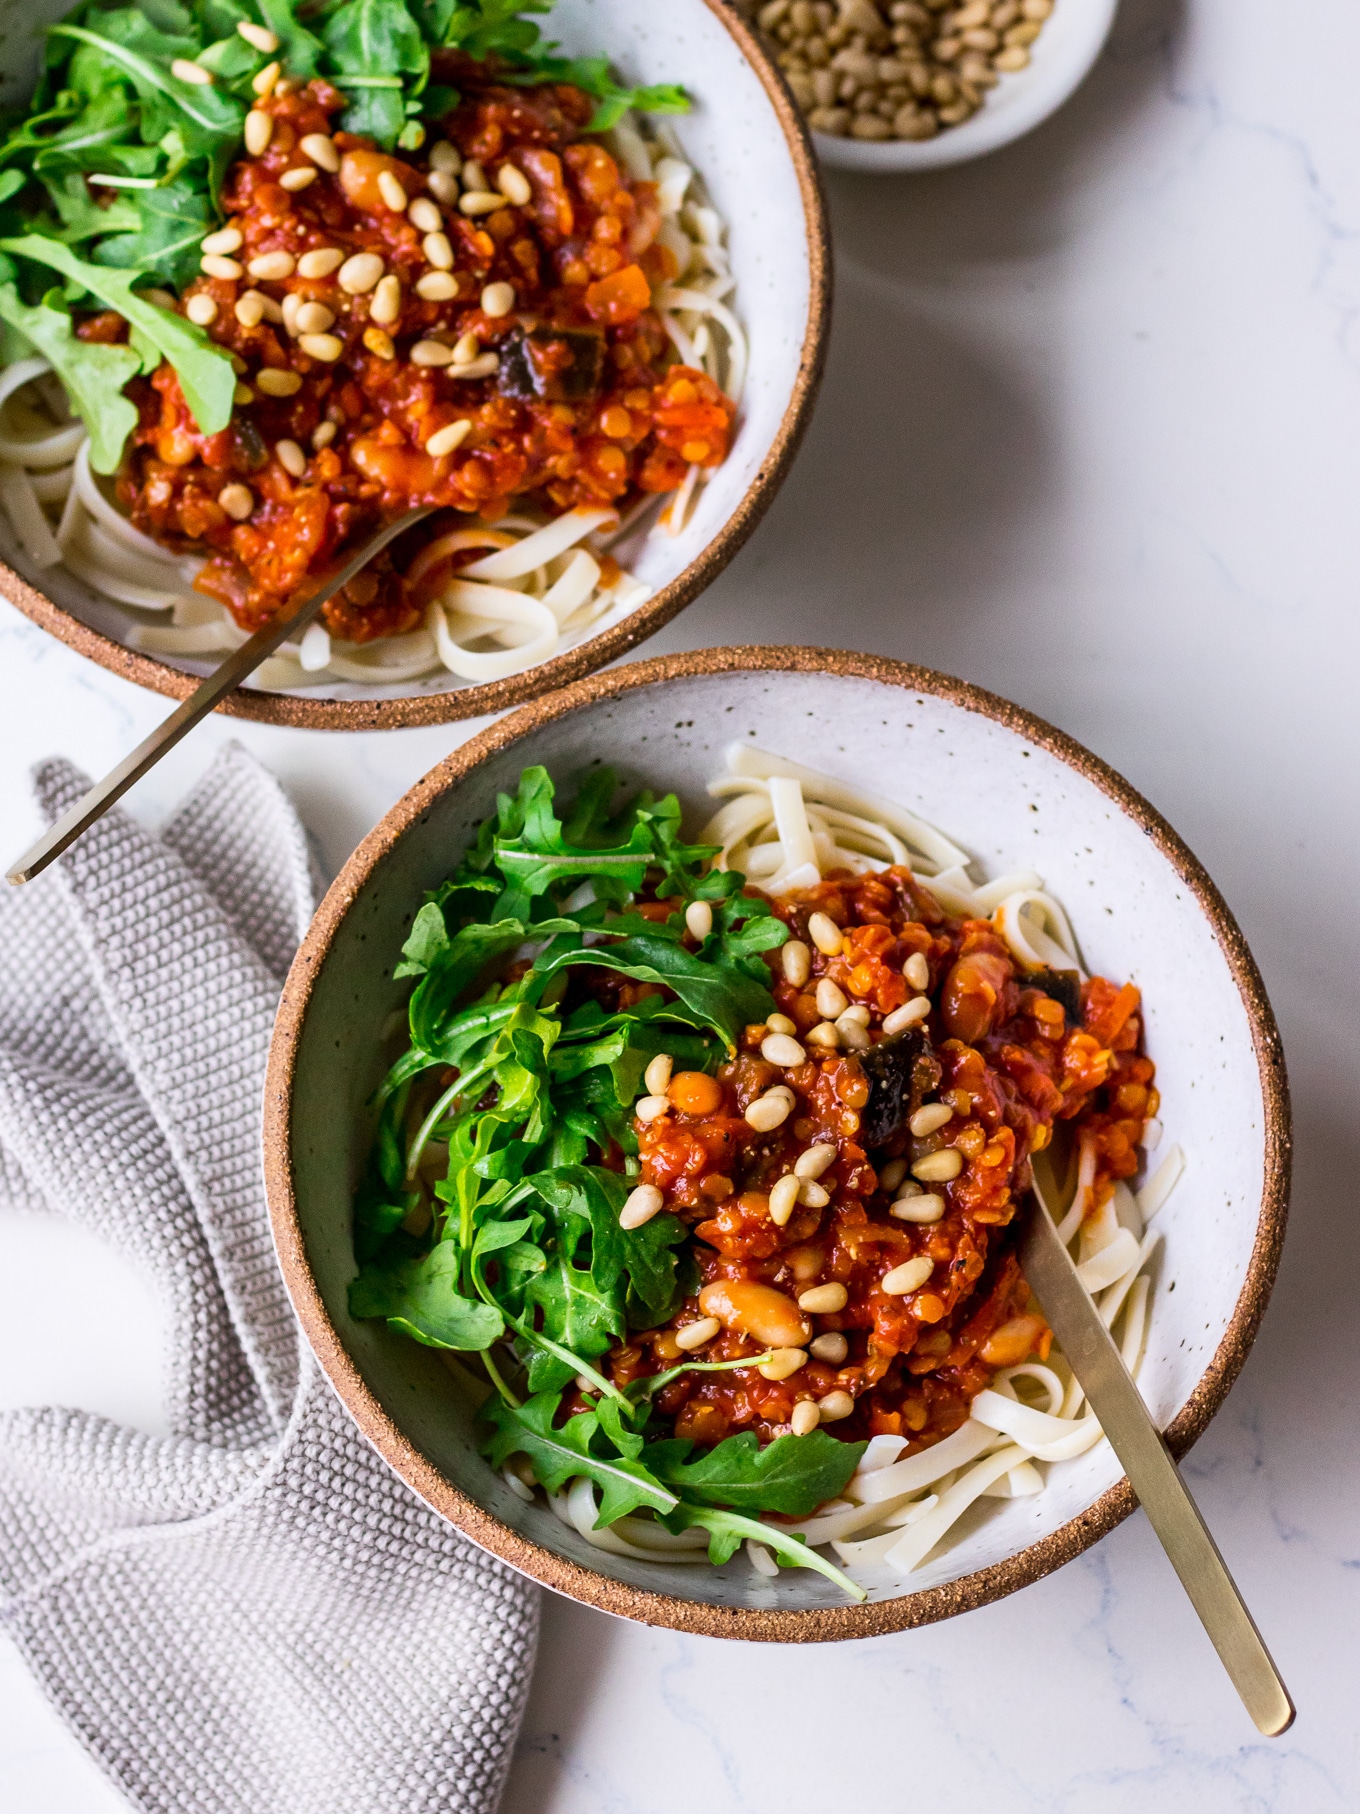 Red Lentil Eggplant Bolognese Recipe (vegan) by Nourish Every Day